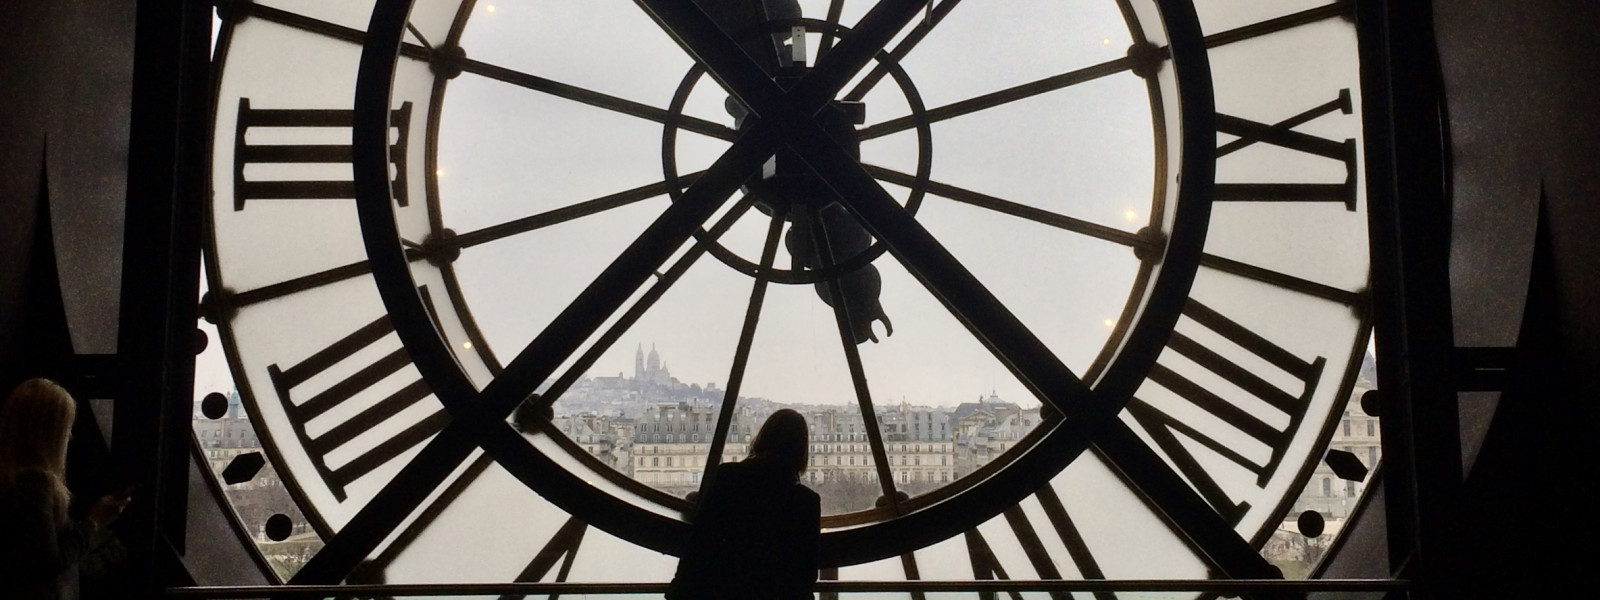 A person looks out at Paris through the Musée d’Orsay clock window